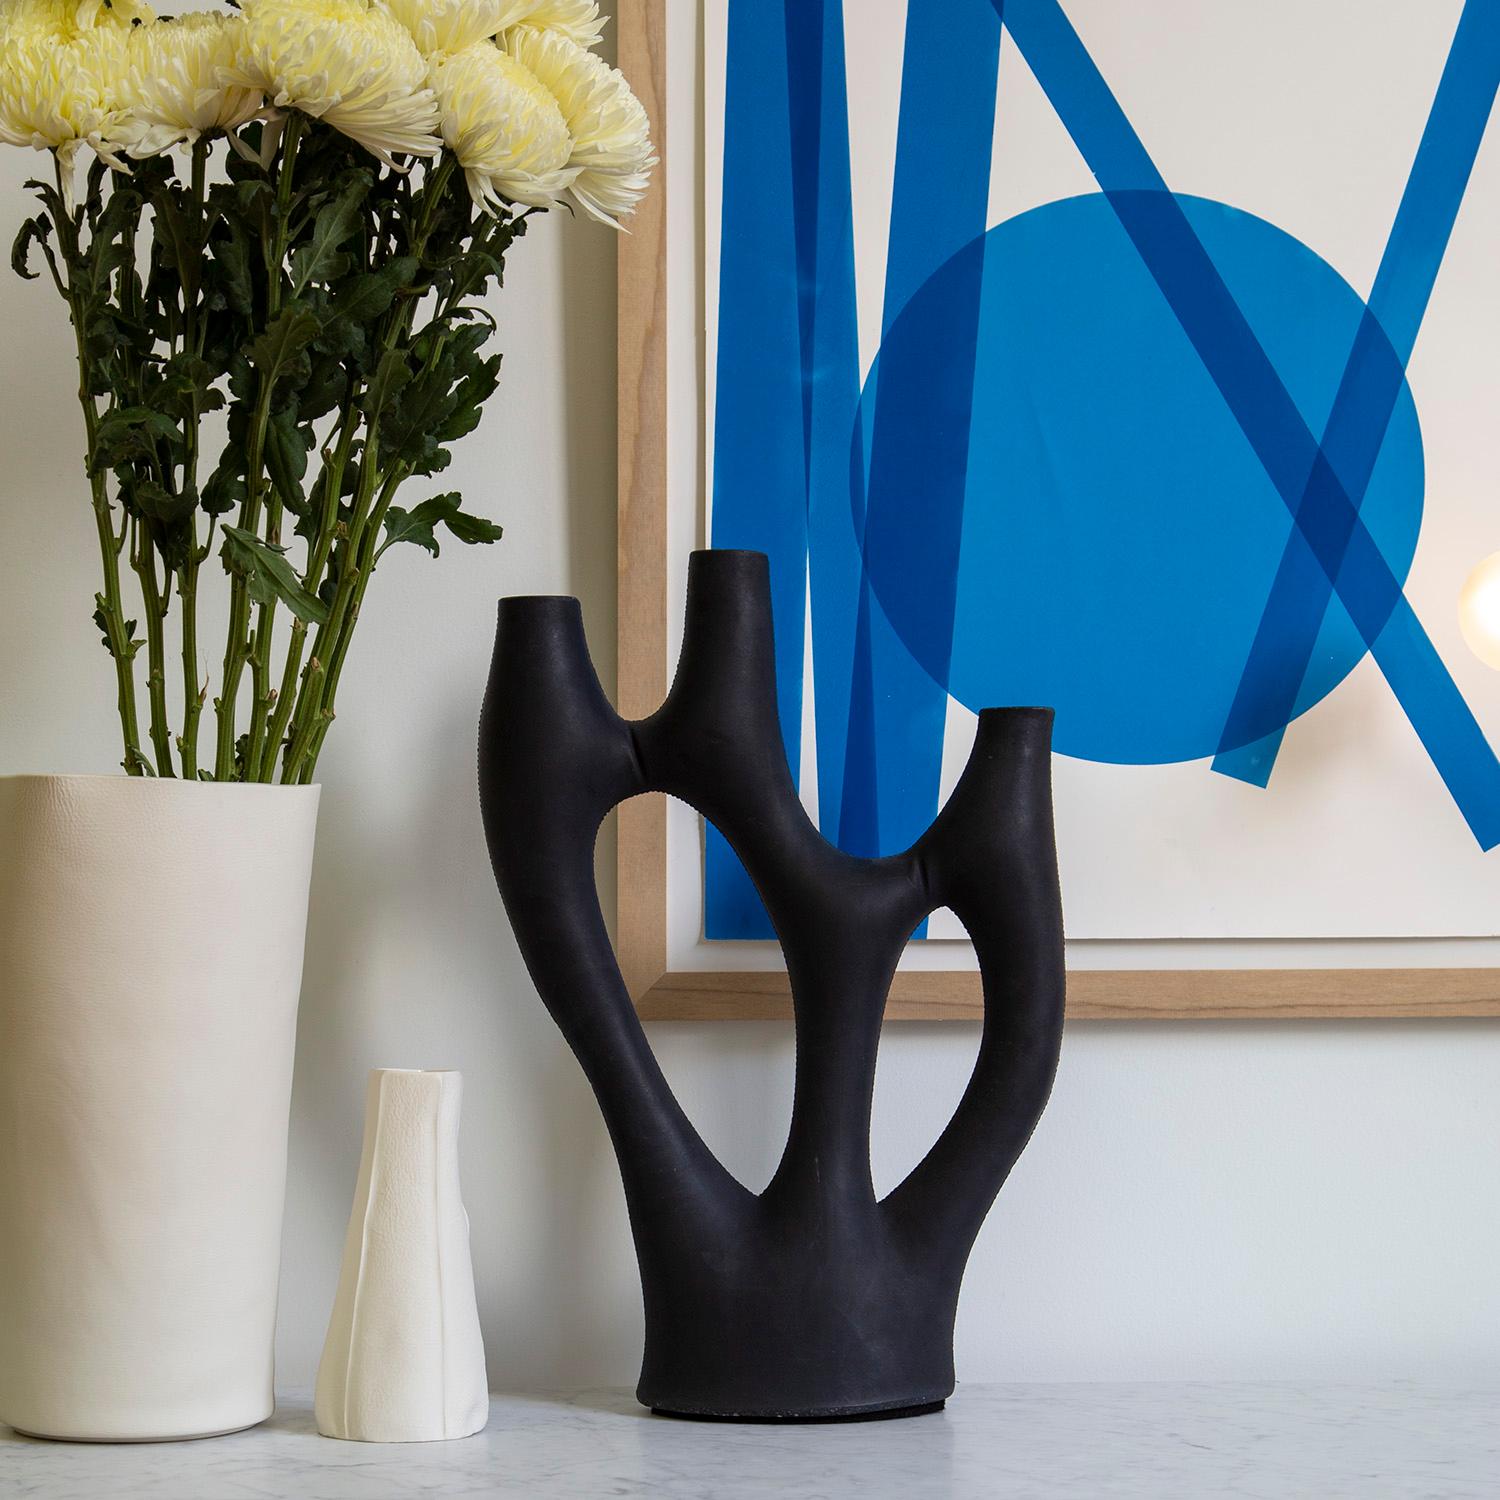 Bold and distinctive, the Kreten candelabra captures the liquidity of concrete in its fluid branching form. Designed with three holes atop each branch for candlesticks, the Kreten candelabra can be an eye-catching source of illumination or can stand